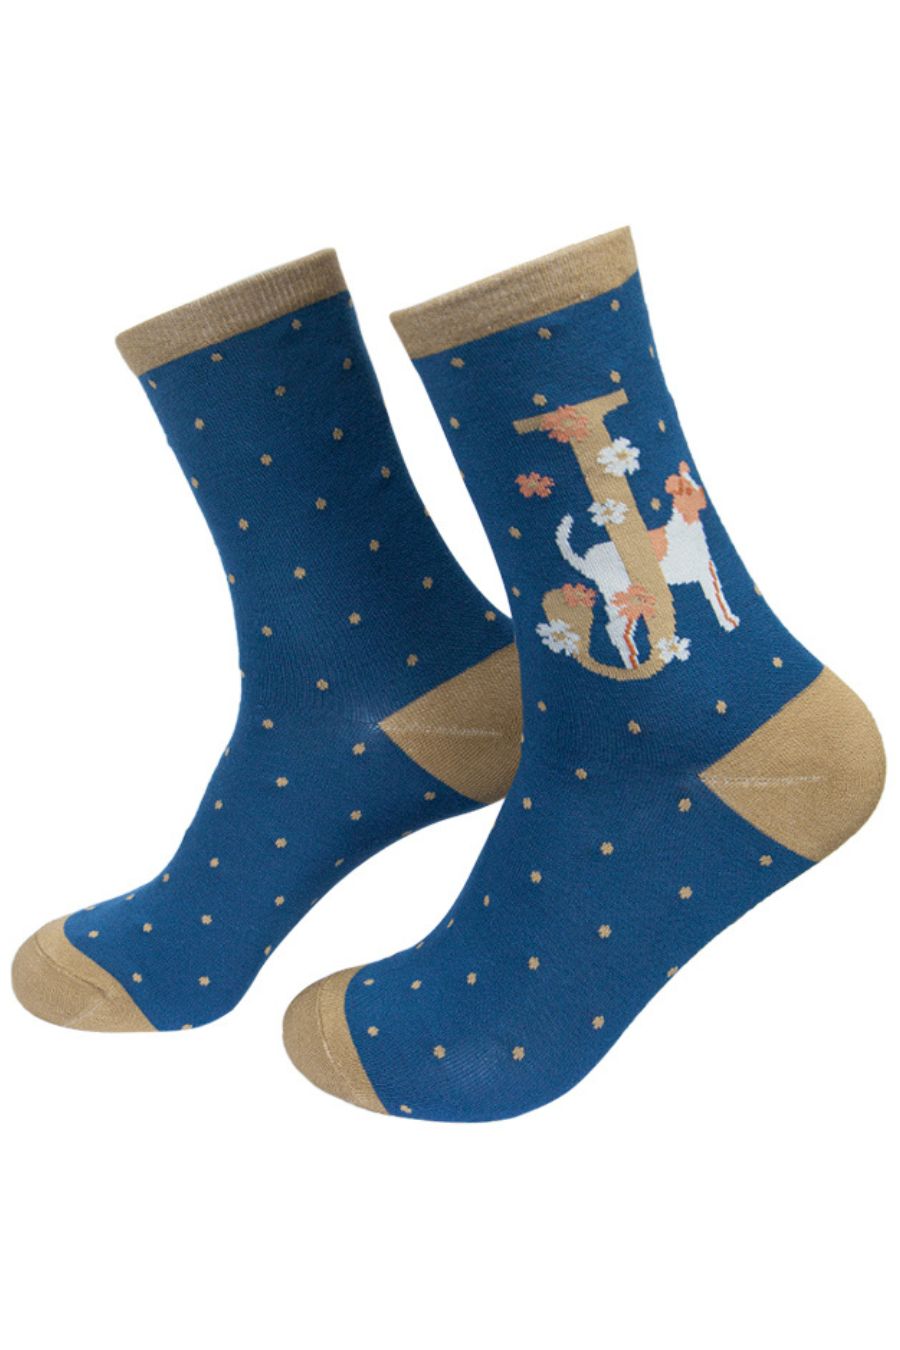 blue socks with a large letter j, a jack russell dog and a floral pattern on the ankle